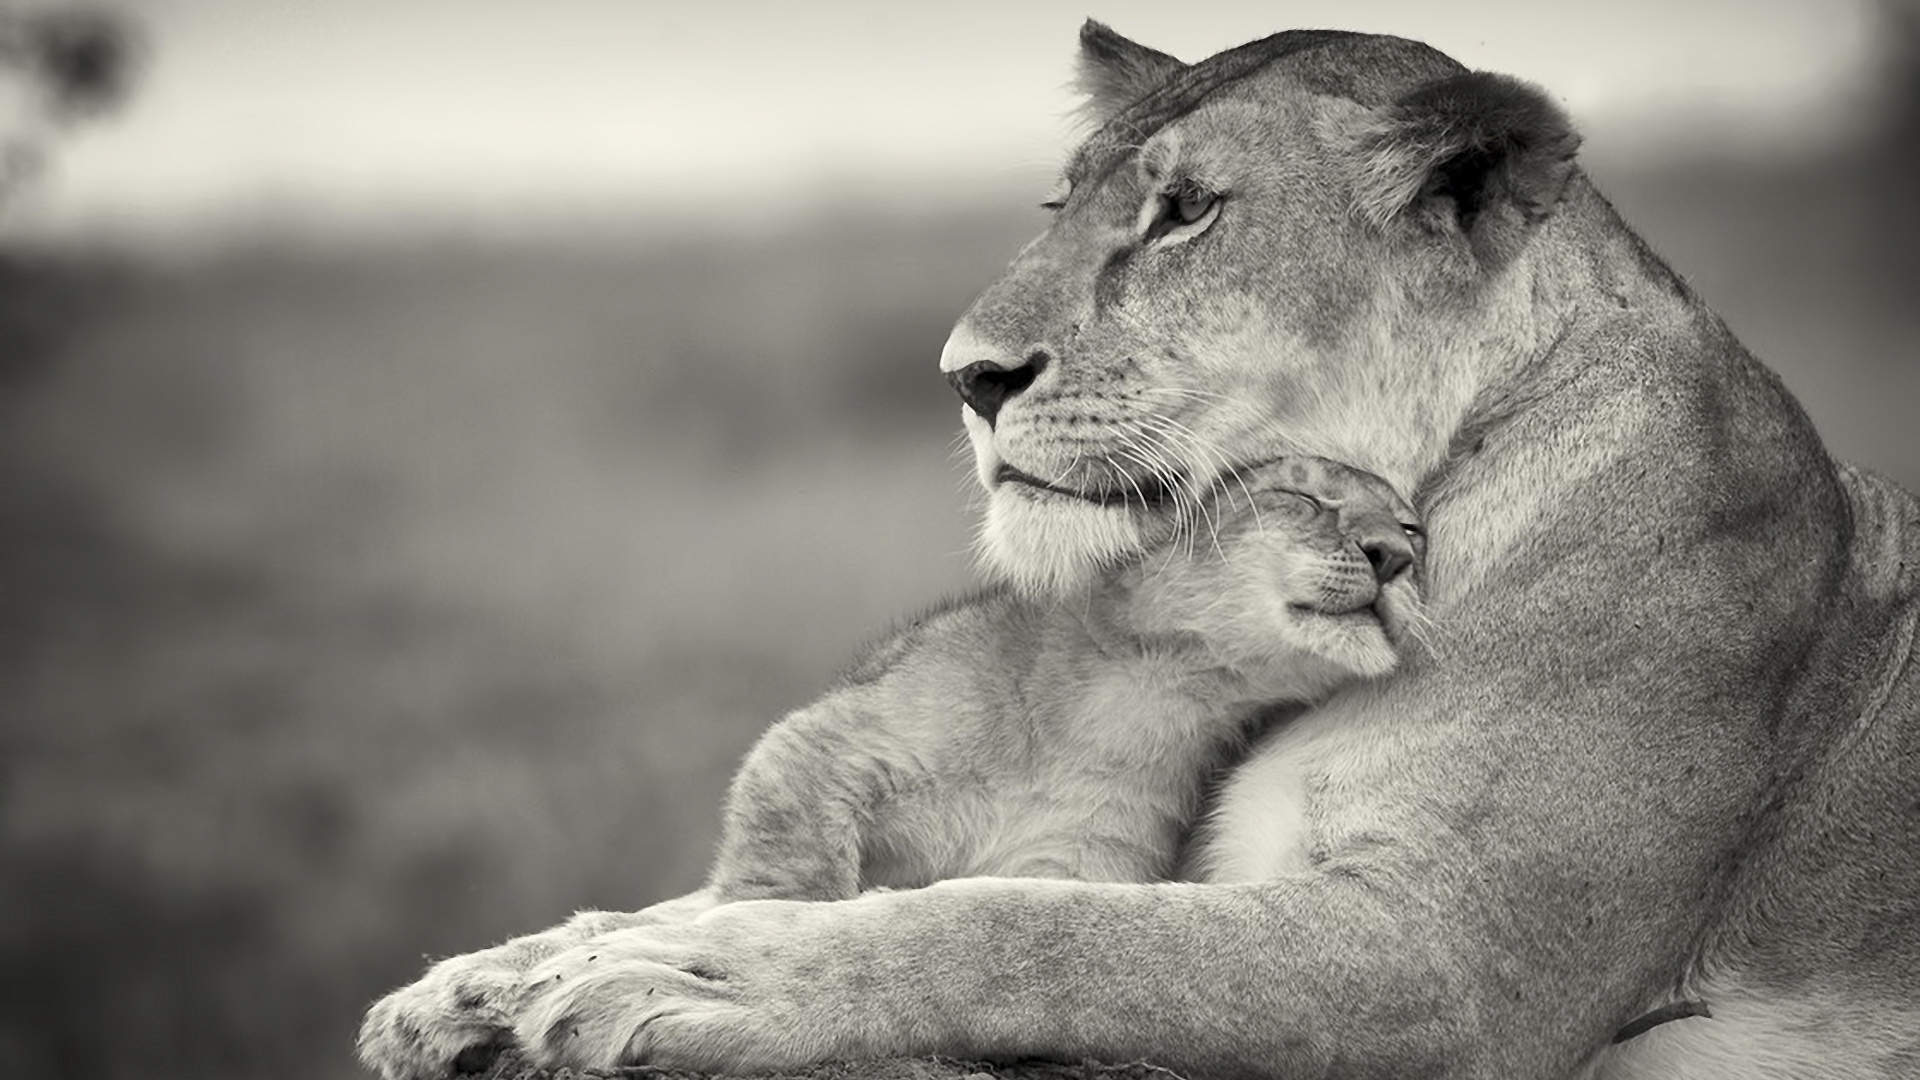 Mothers Love Images And Wallpaper - Lioness And Baby Lion - HD Wallpaper 